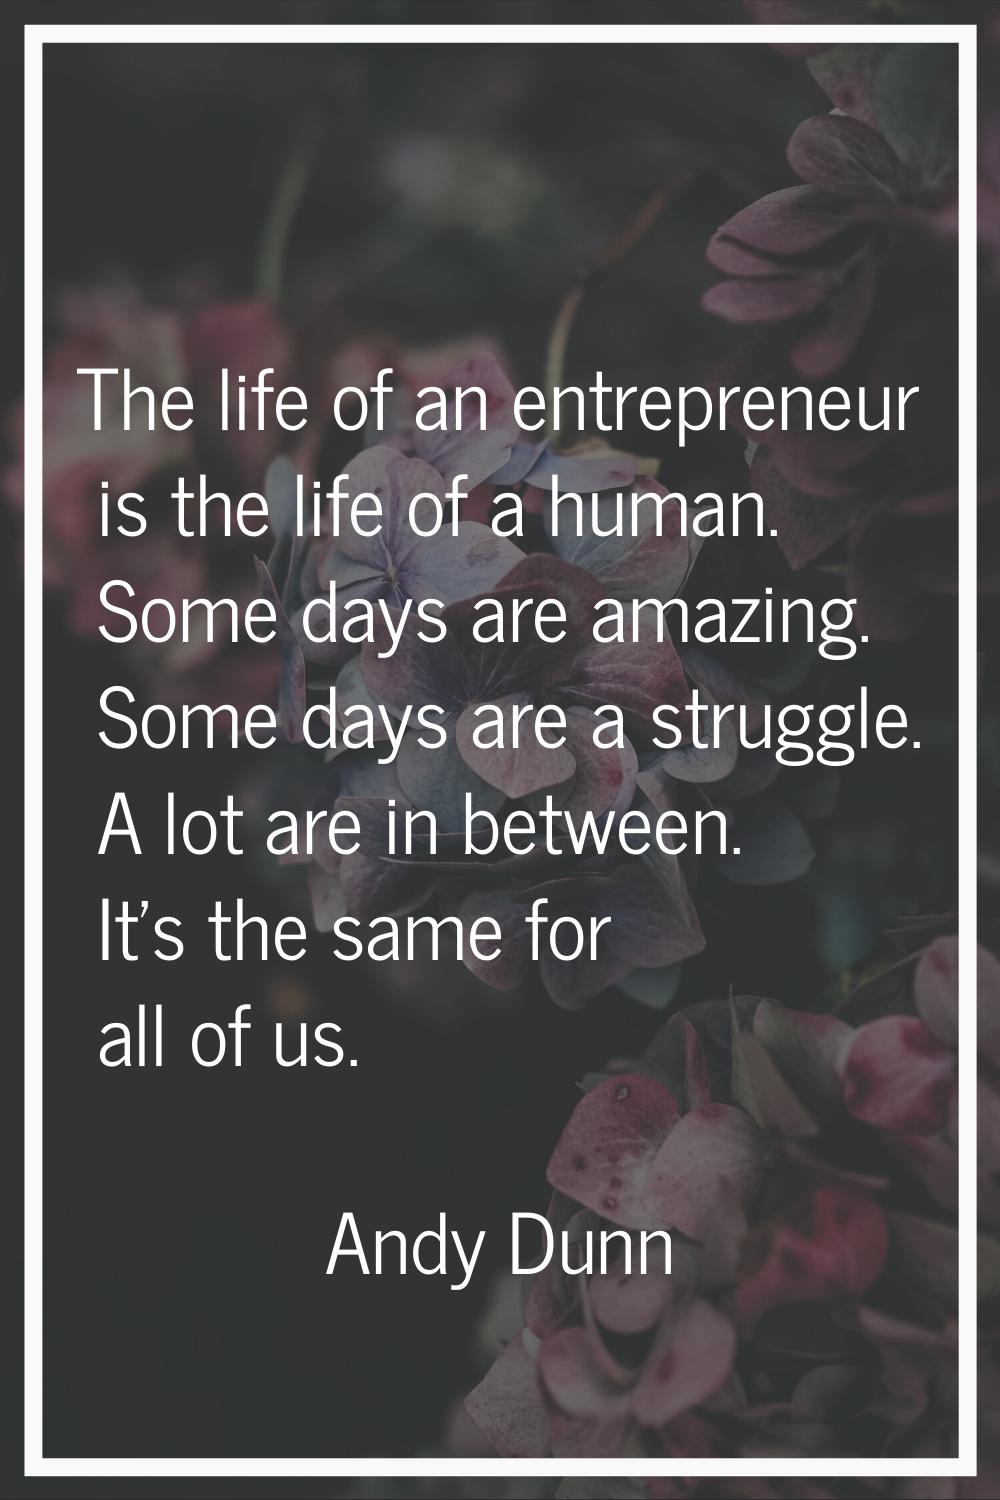 The life of an entrepreneur is the life of a human. Some days are amazing. Some days are a struggle